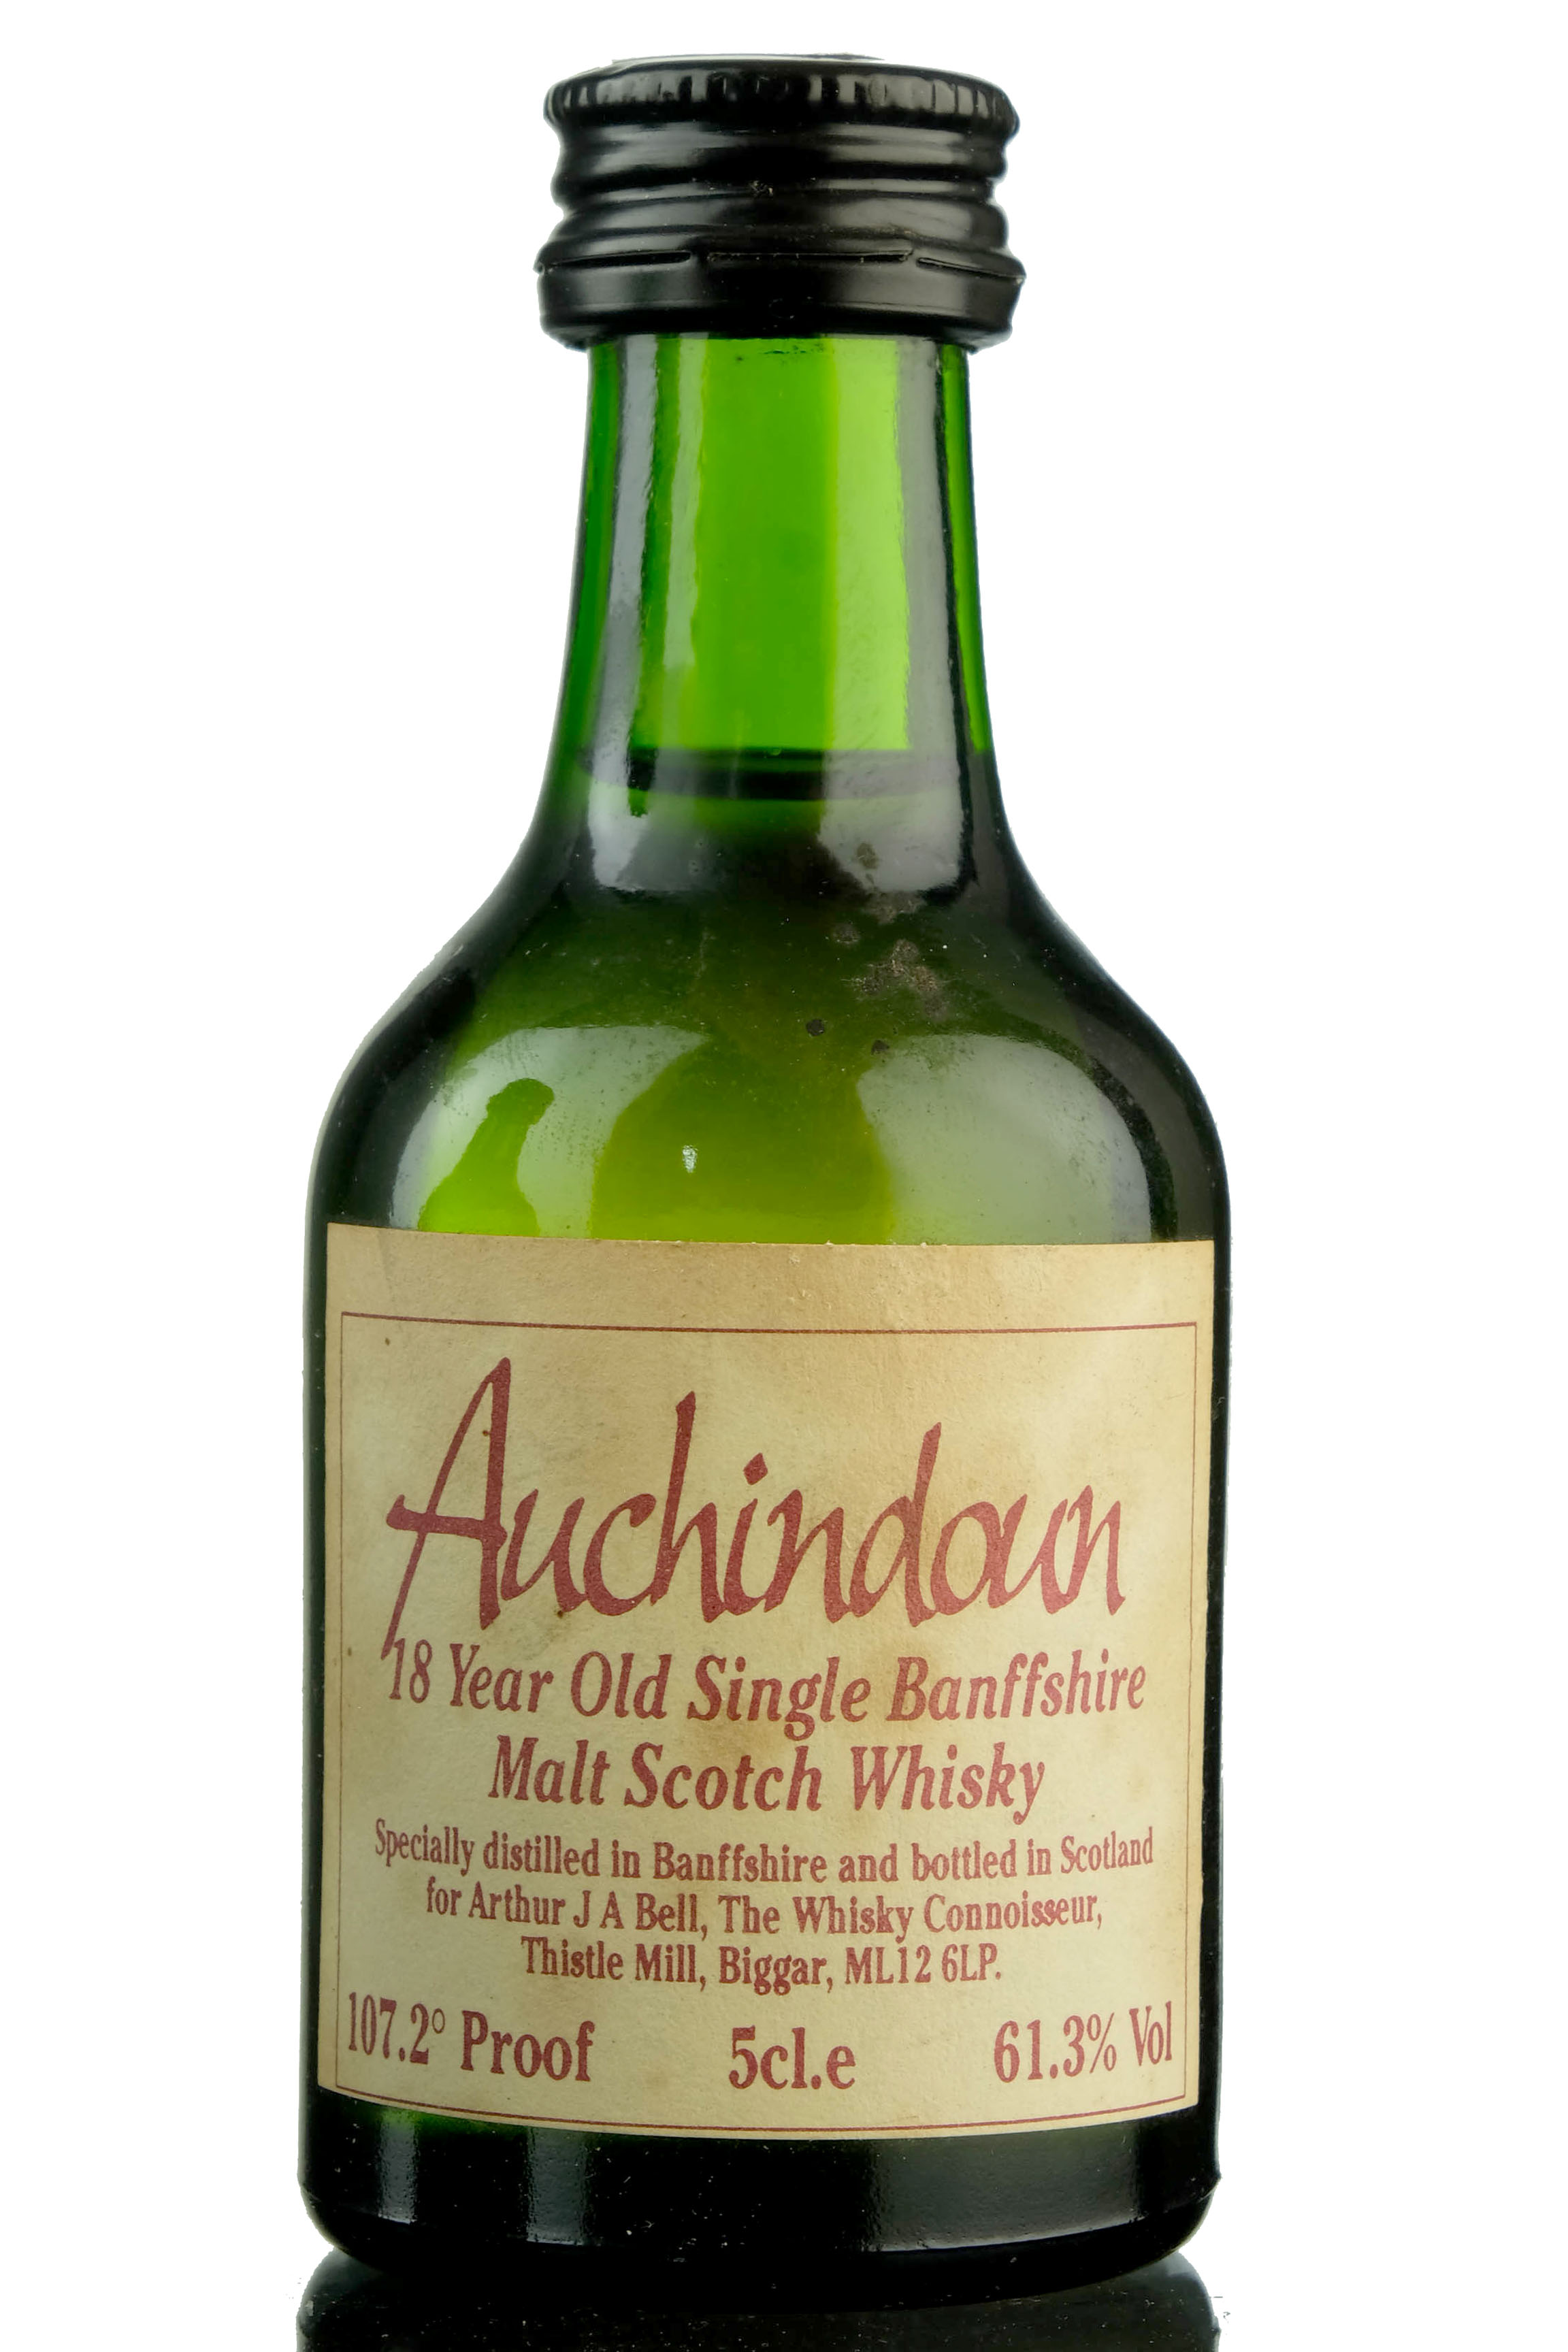 Auchindown (Mortlach) 18 Year Old - Whisky Connoisseur Miniature